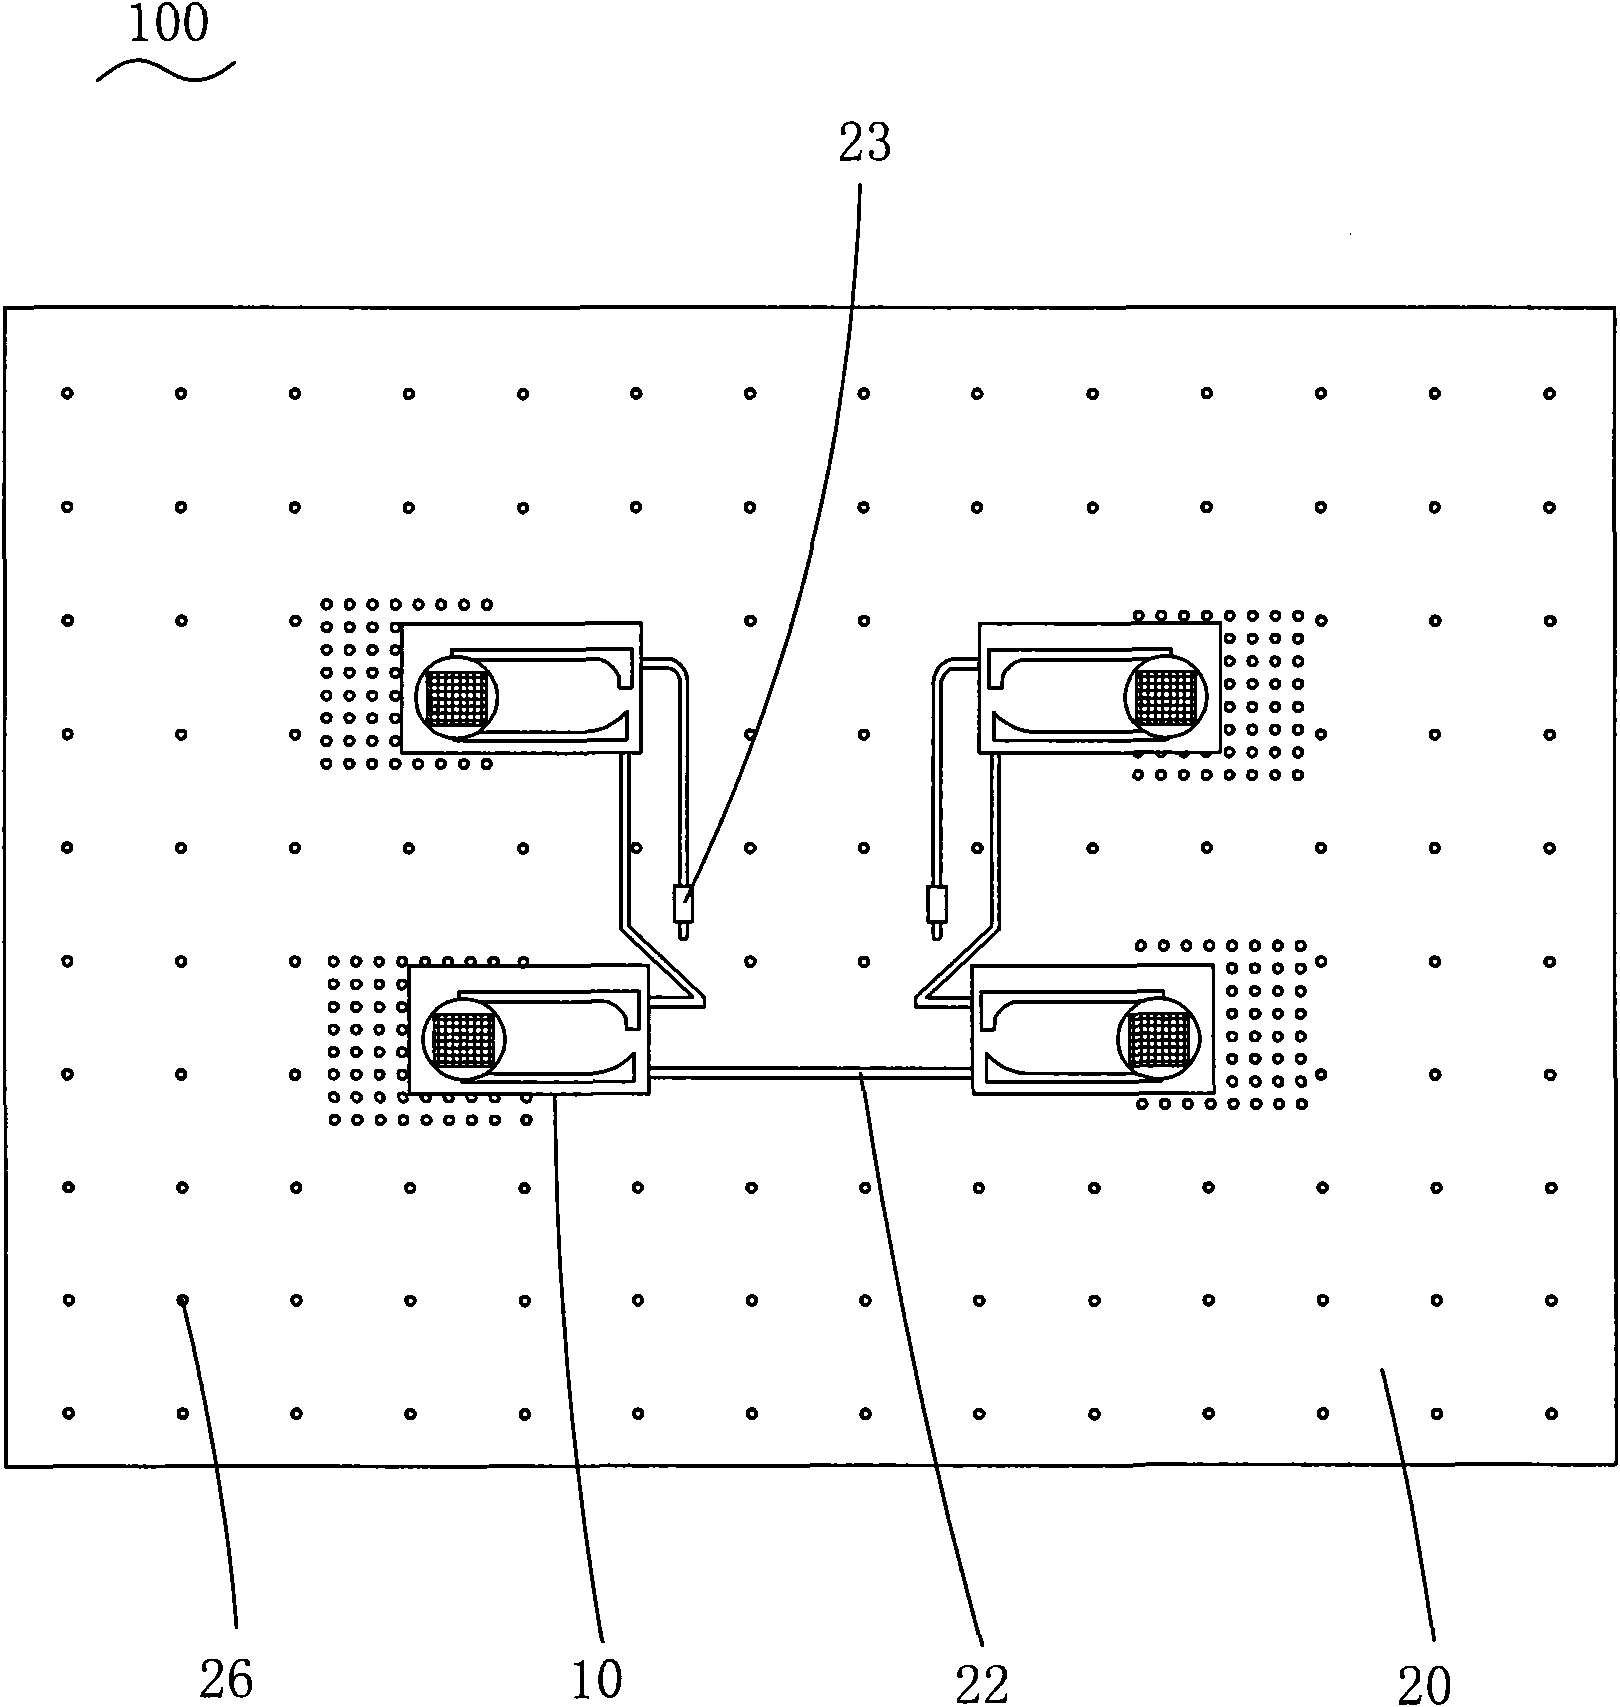 Light emitting diode (LED) lamp with heat dissipation circuit board